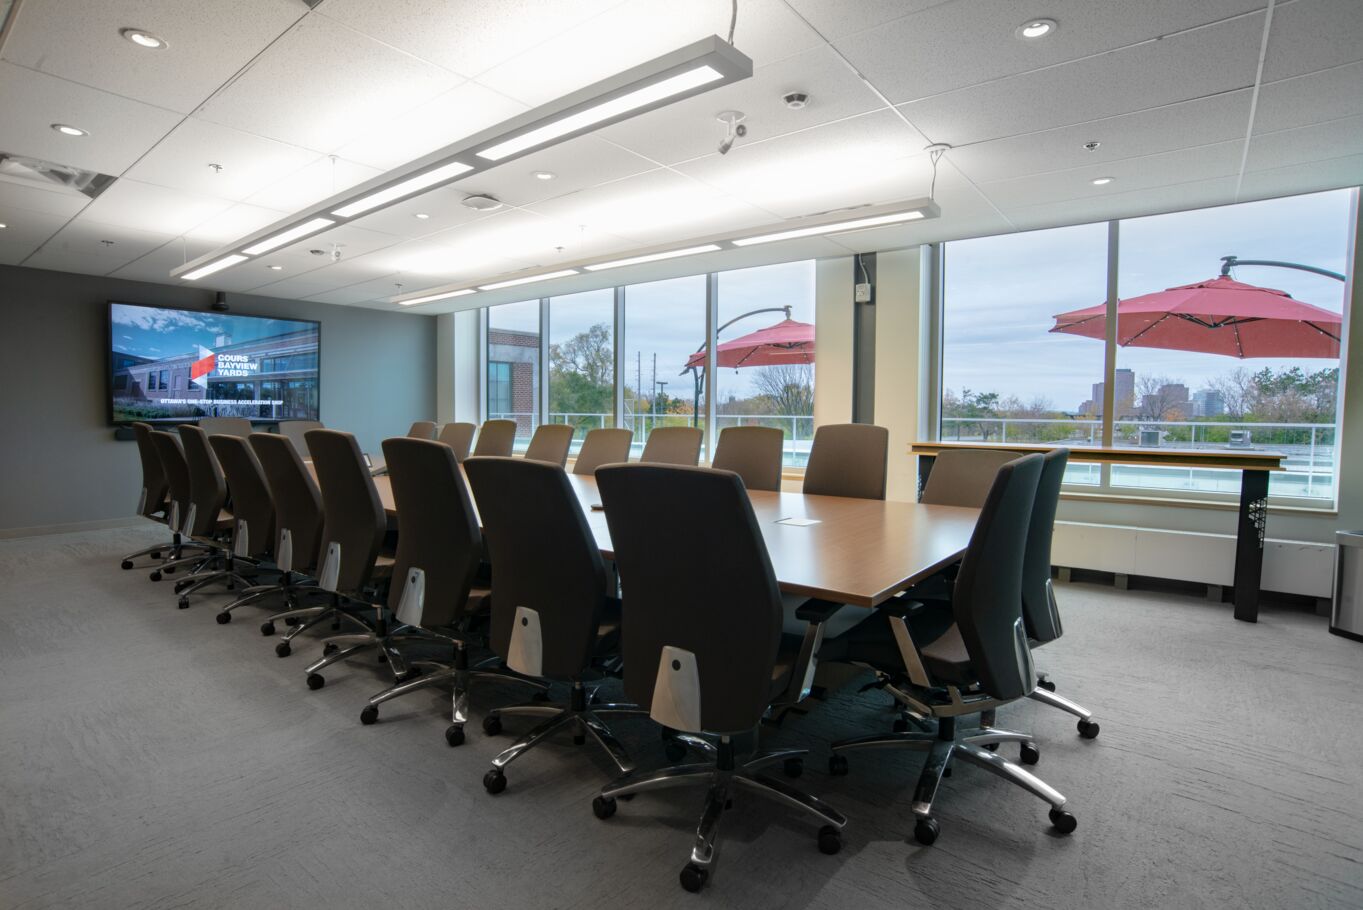 Image shows Executive Boardroom at Bayview Yards